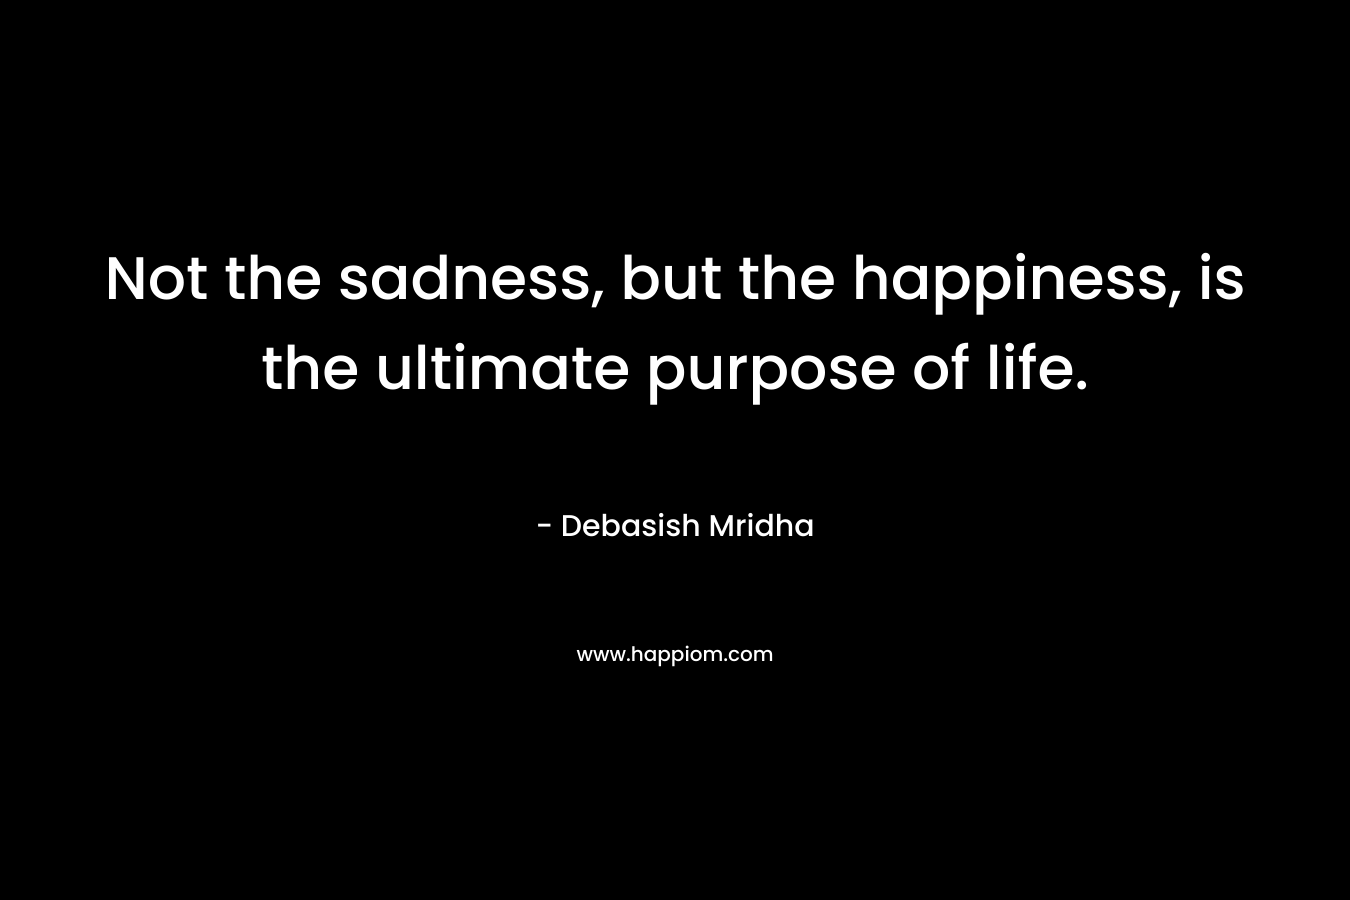 Not the sadness, but the happiness, is the ultimate purpose of life.